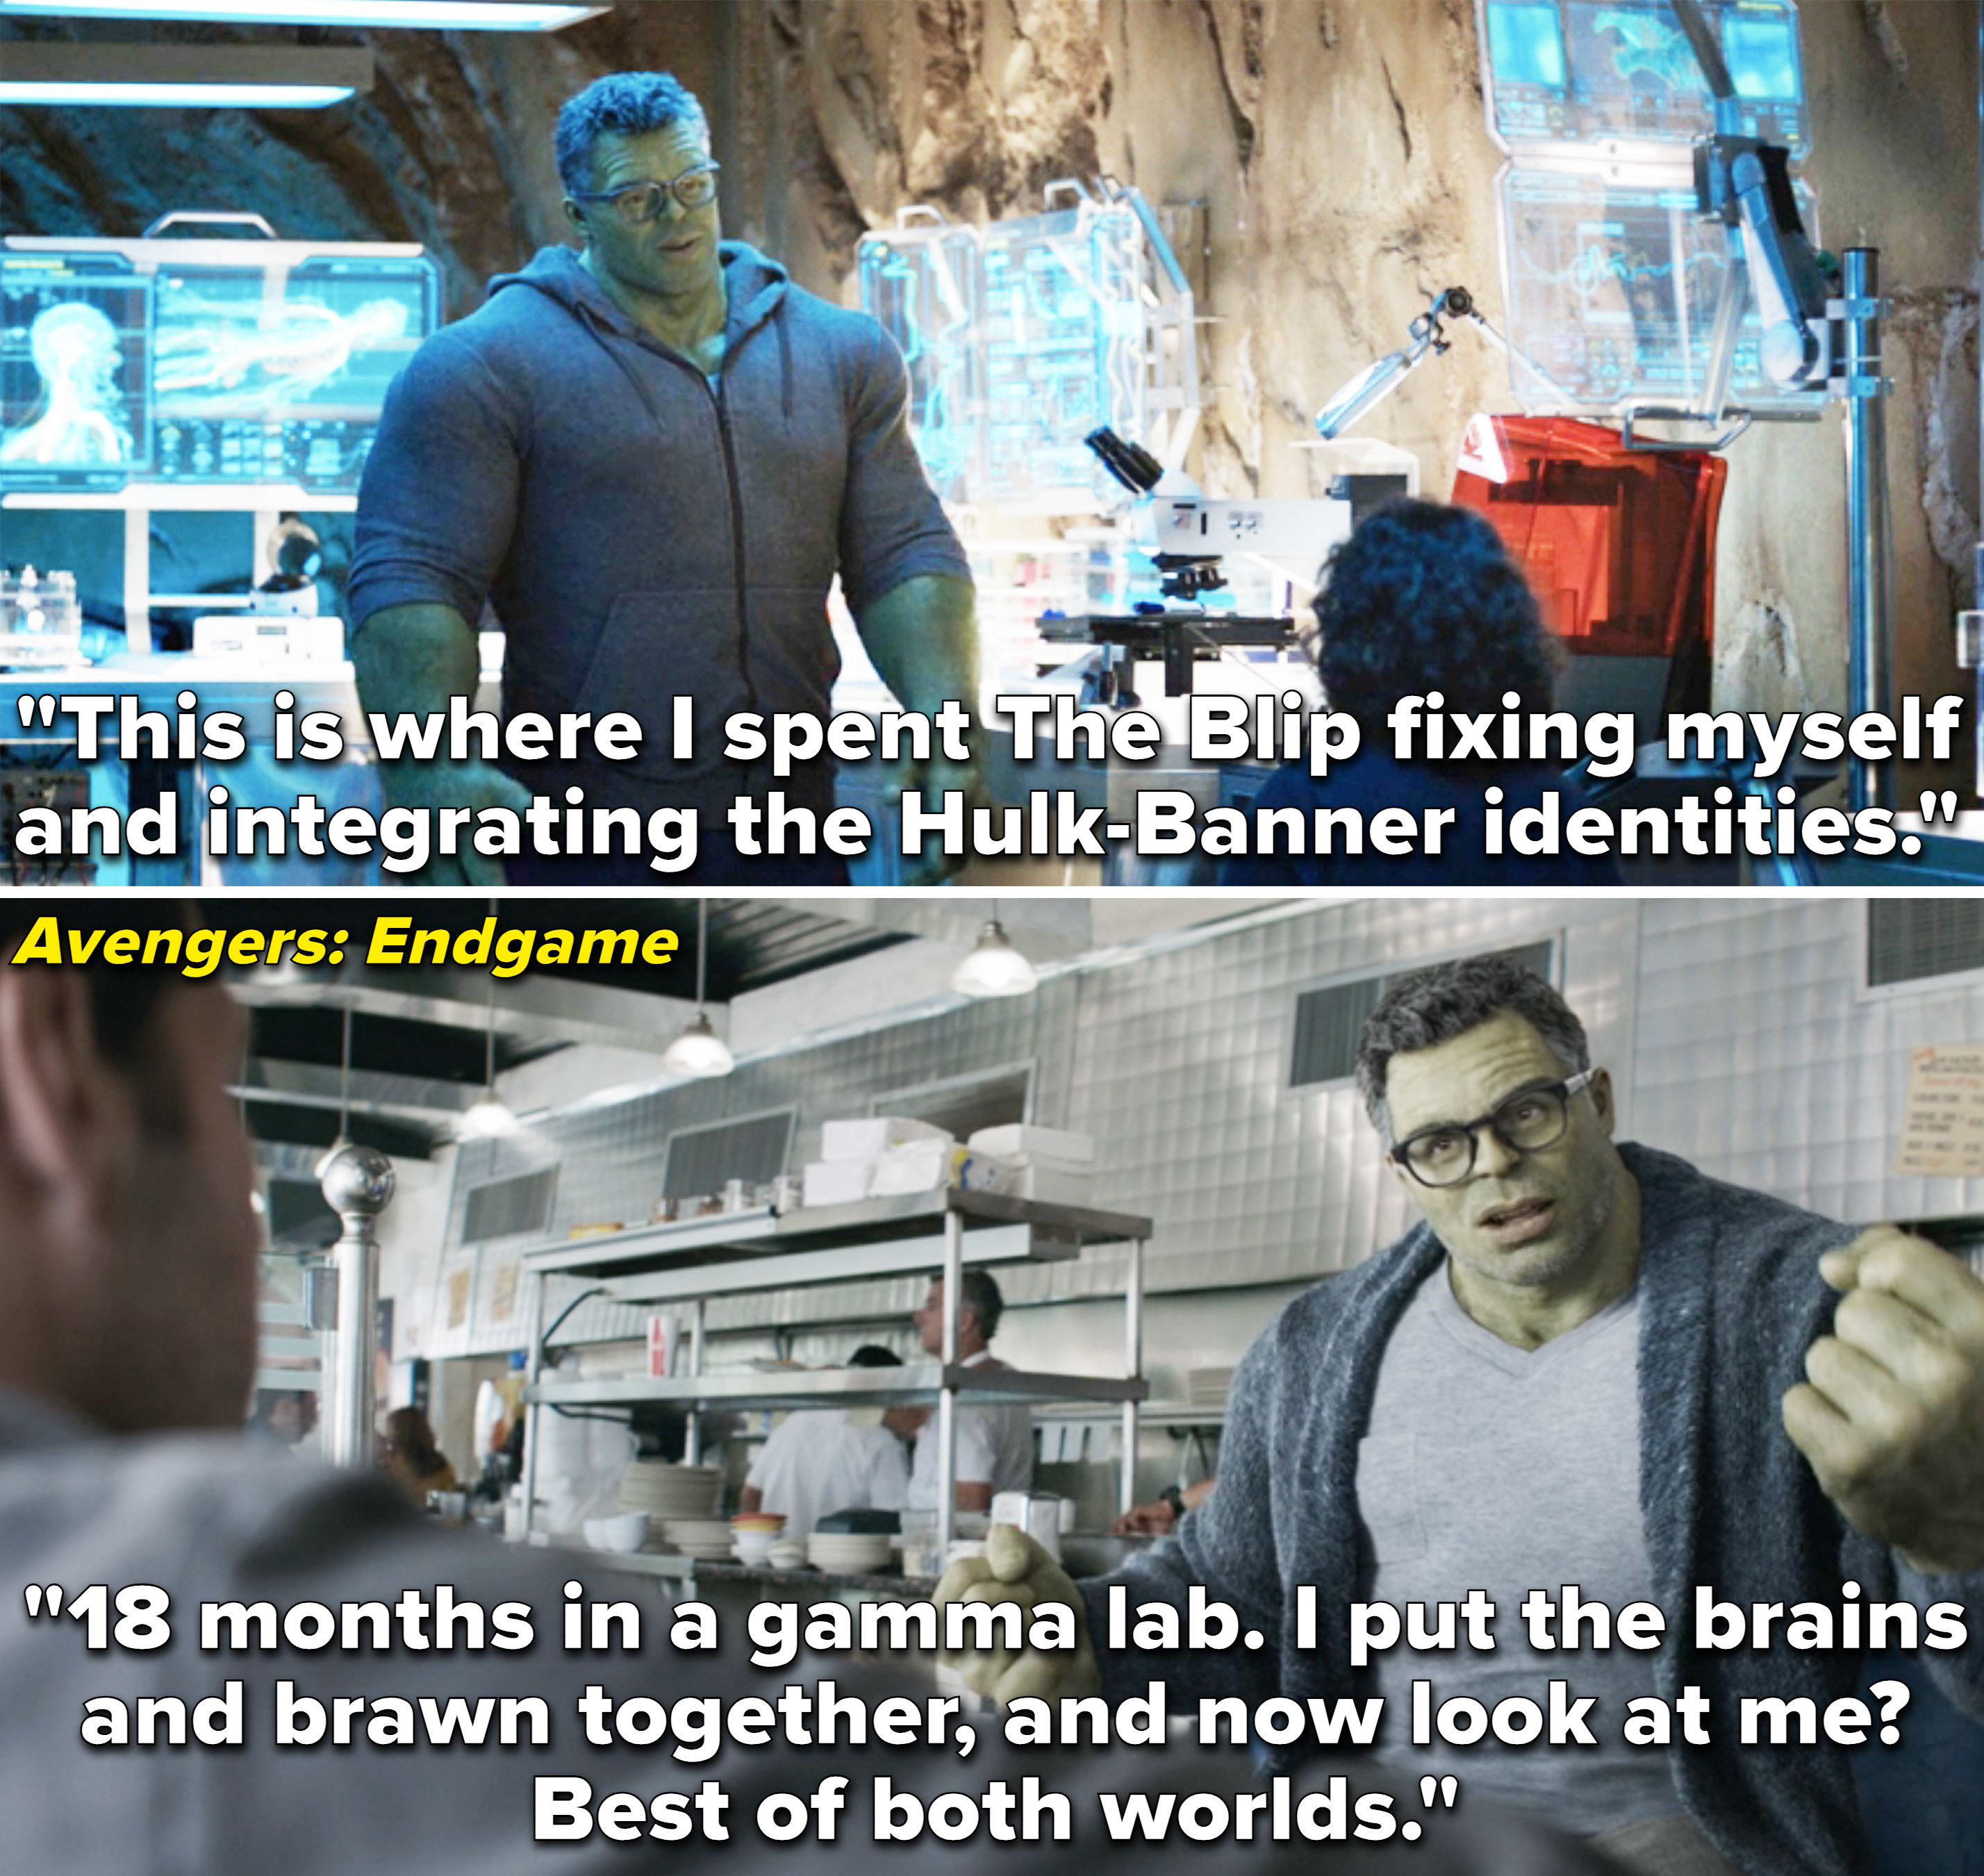 Bruce explaining he spent The Blip in this lab, integrating the Hulk and Banner identities, so now he has both brains and brawn